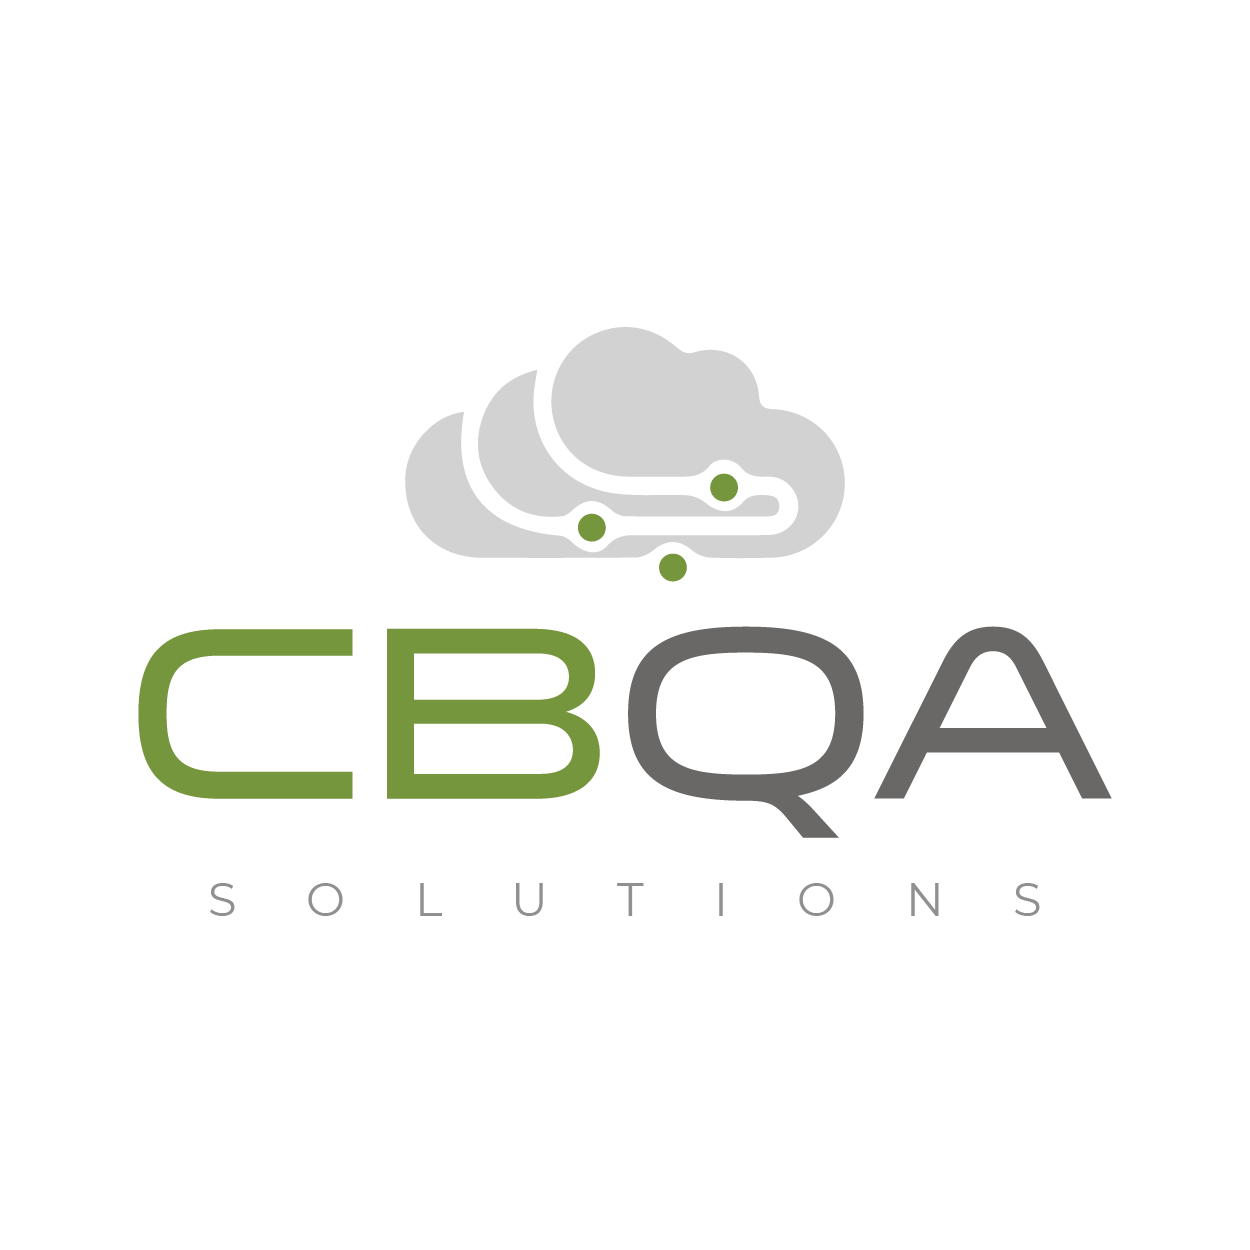 CBQA Solutions profile on Qualified.One